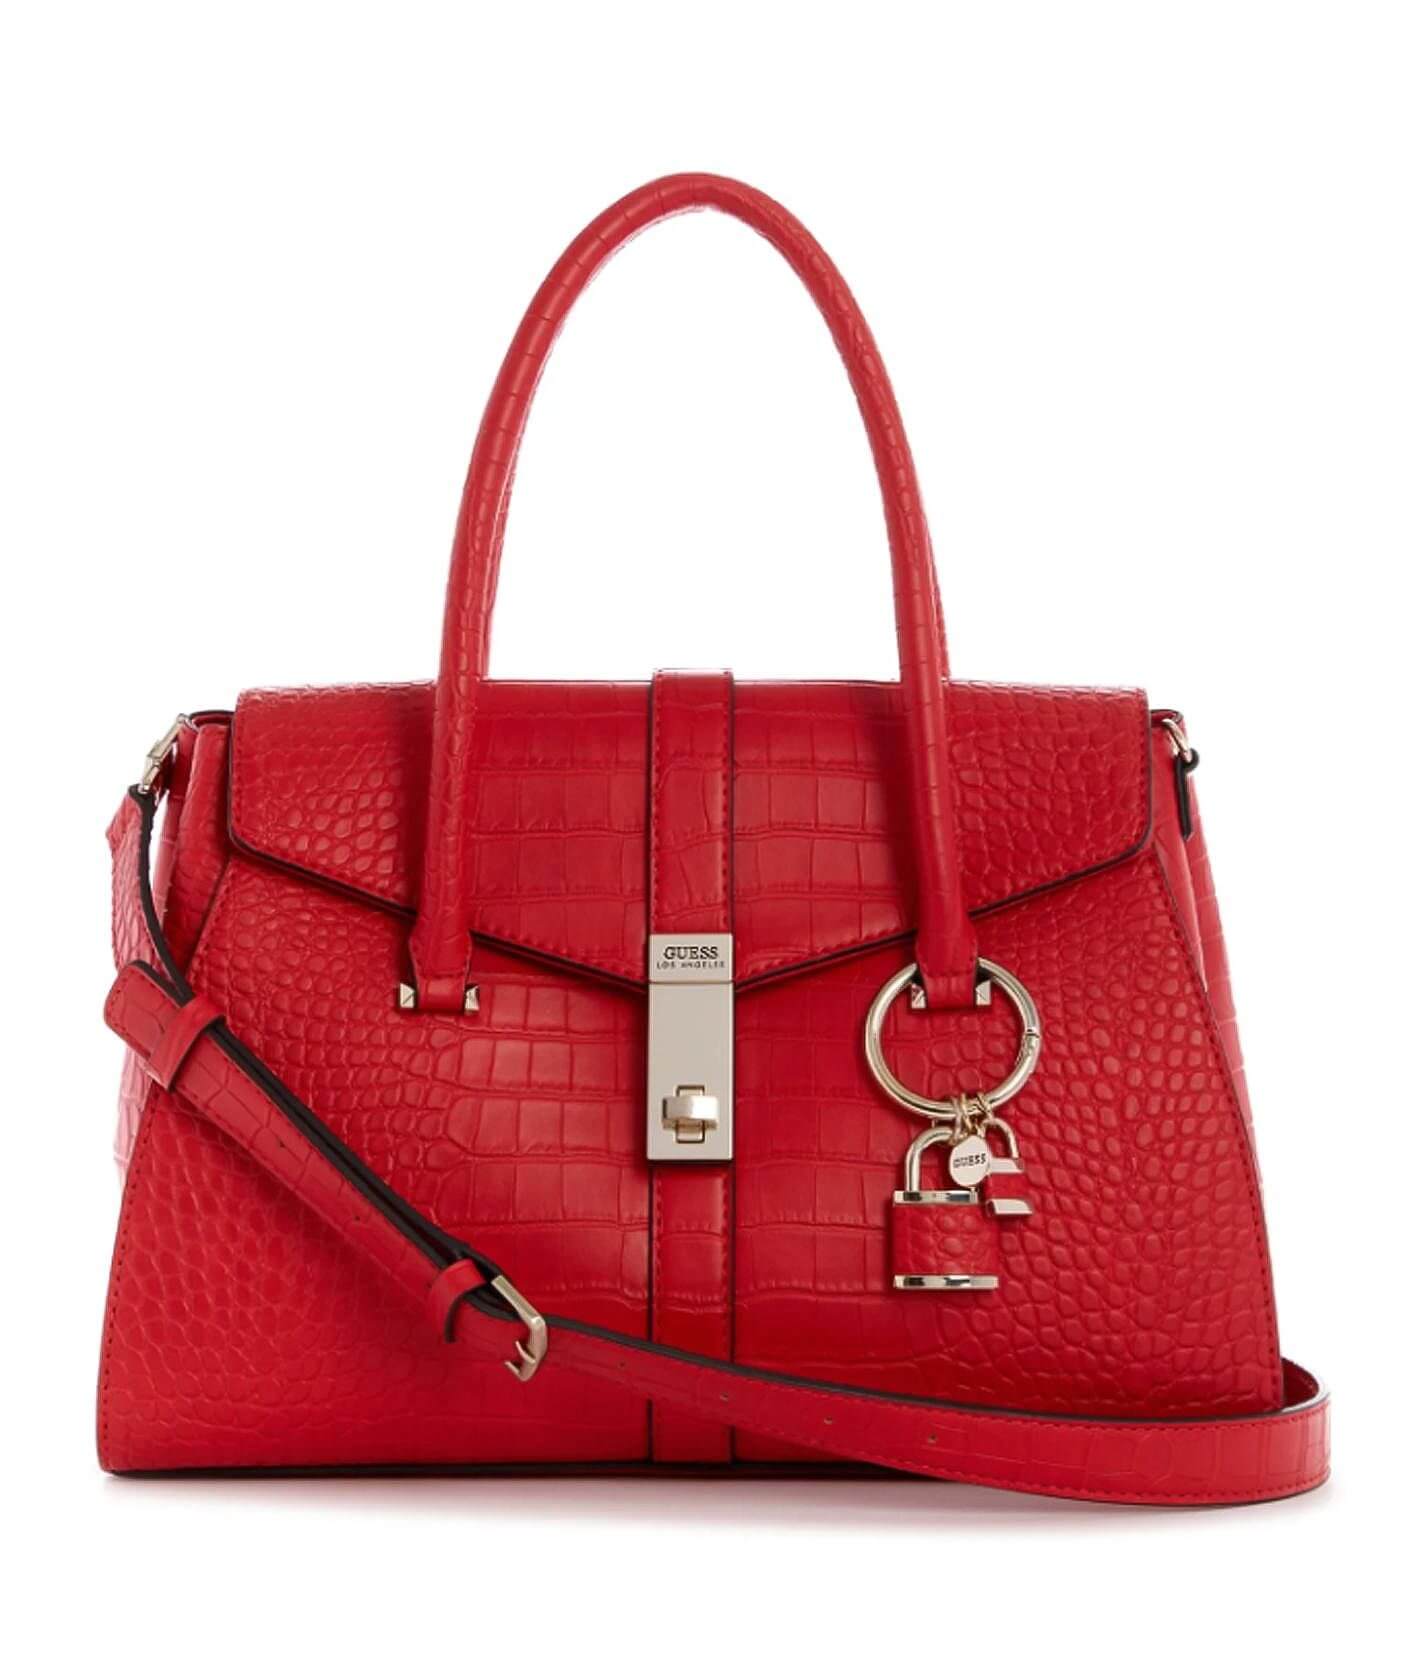 Guess Red Purse 